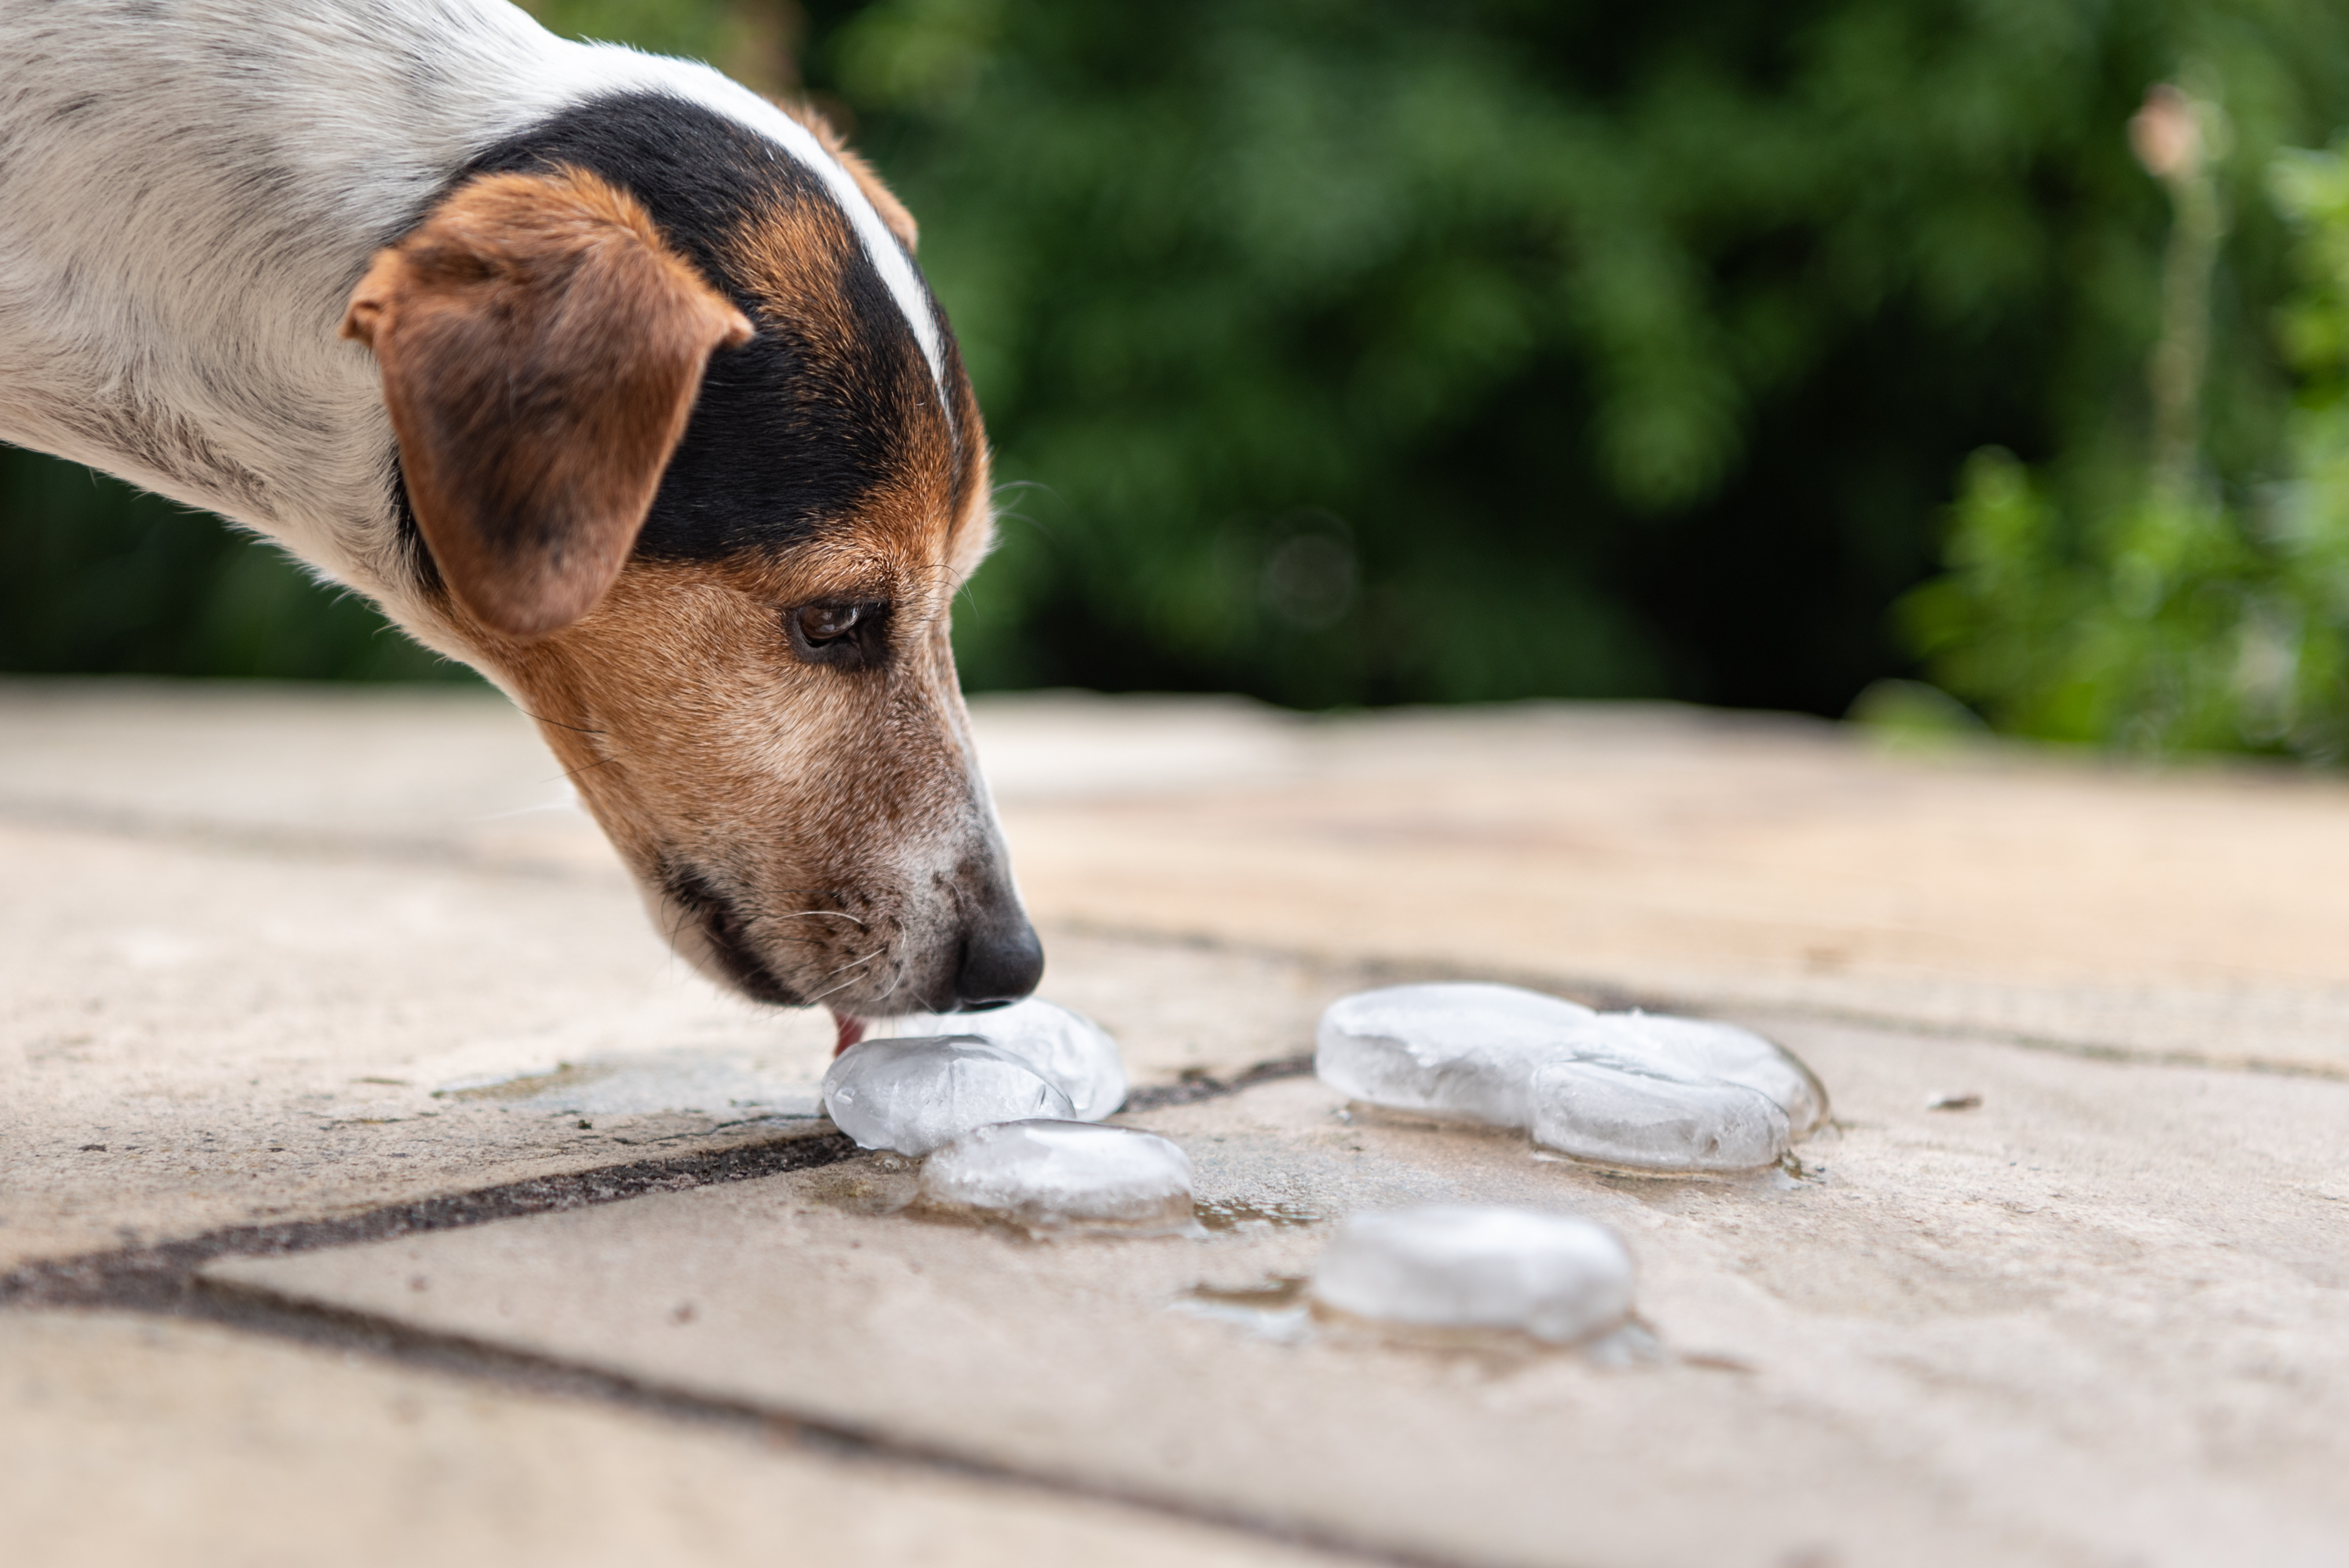 Summer DIY: freezing your dog's toys in ice can help him stay cool